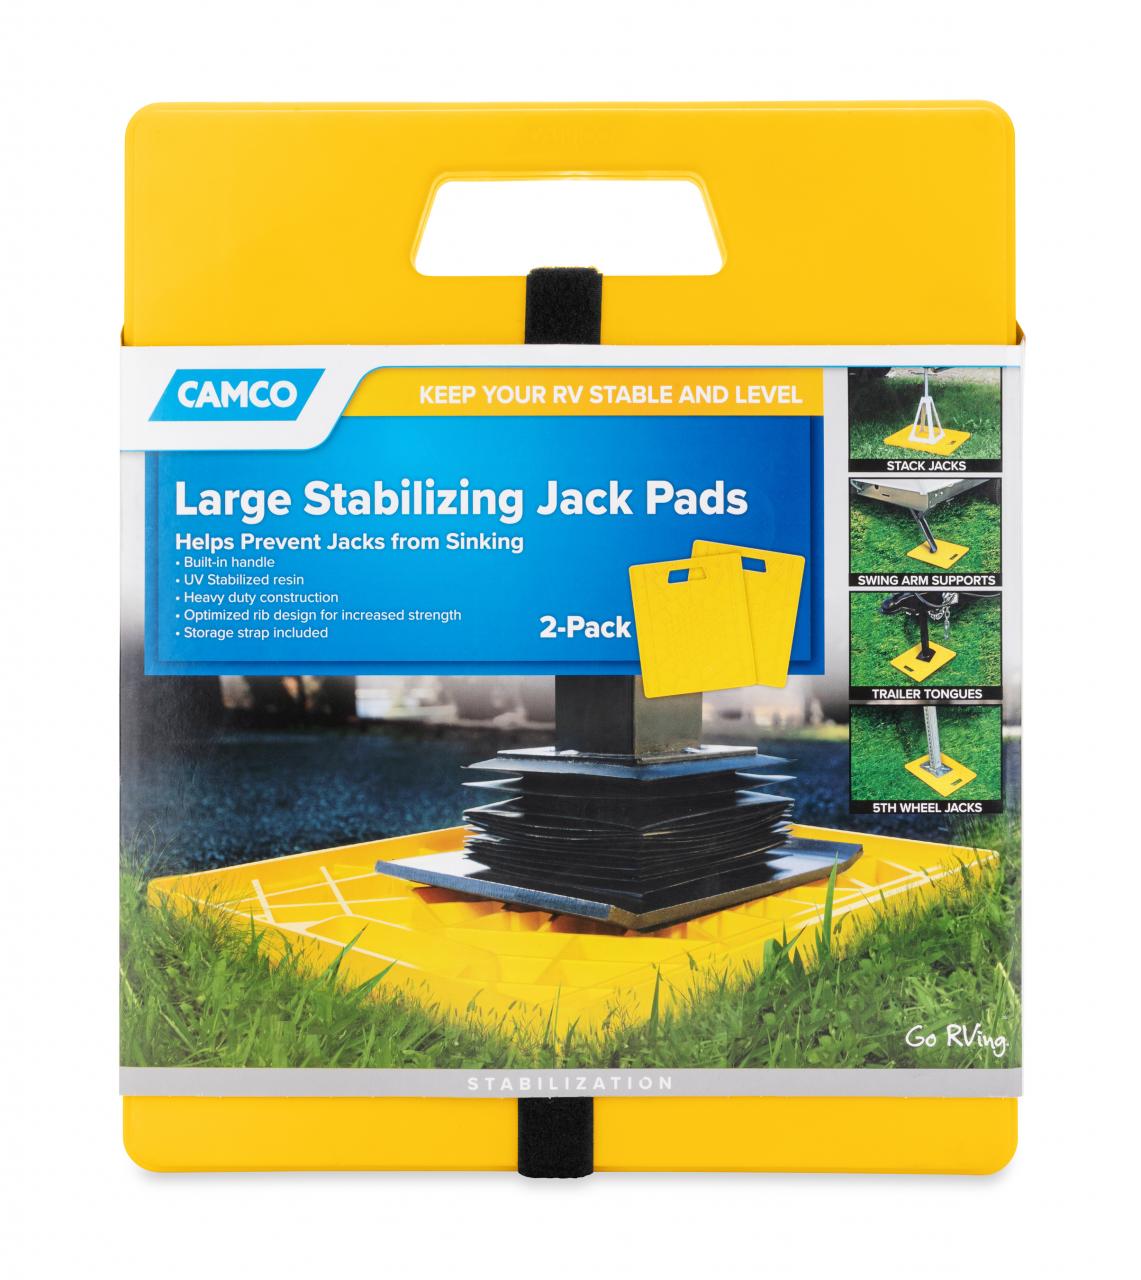 Buy Camco RV Stabilizing Jack Pads, Helps Prevent Jacks From Sinking, 6.5  Inch x 9 Inch Pad - 4 Pack (44595), Yellow Online in Indonesia. B000BUU5XQ